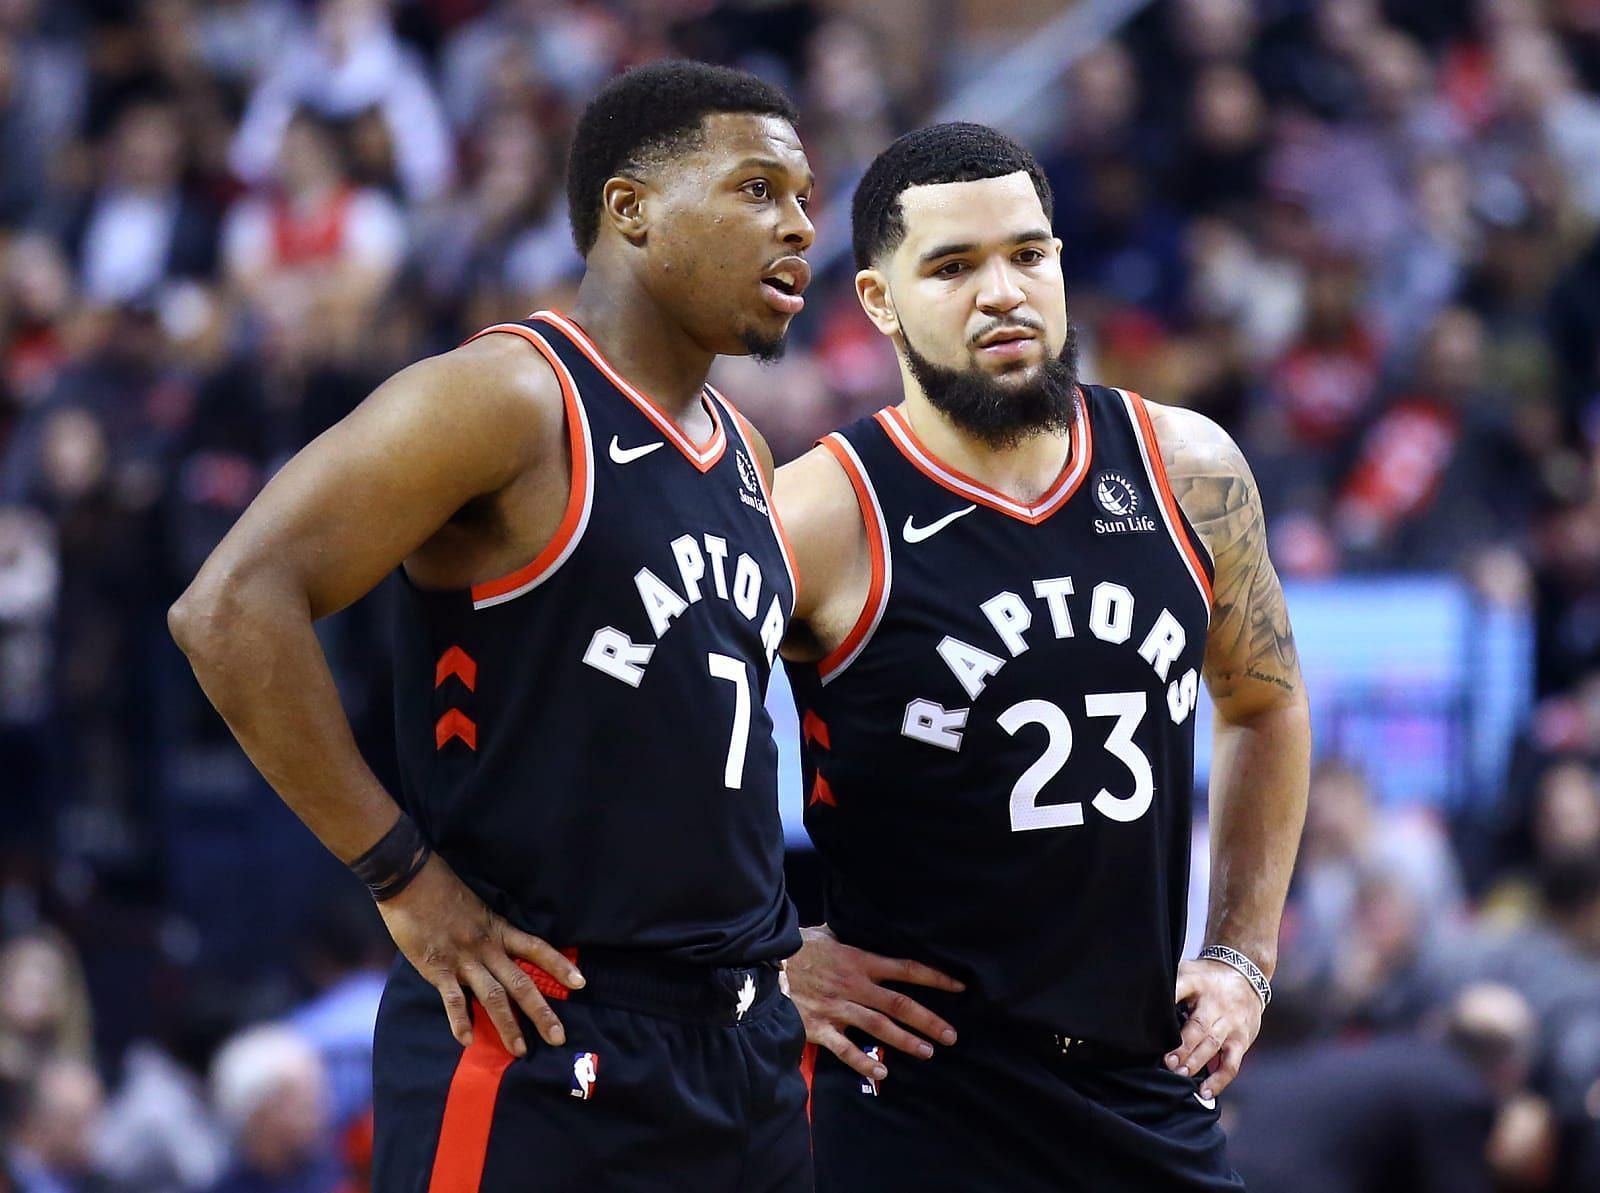 Mentor and student will not meet as Kyle Lowry (#7), now with the Miami Heat, is out for personal reasons. [Photo: Hoops Habit]